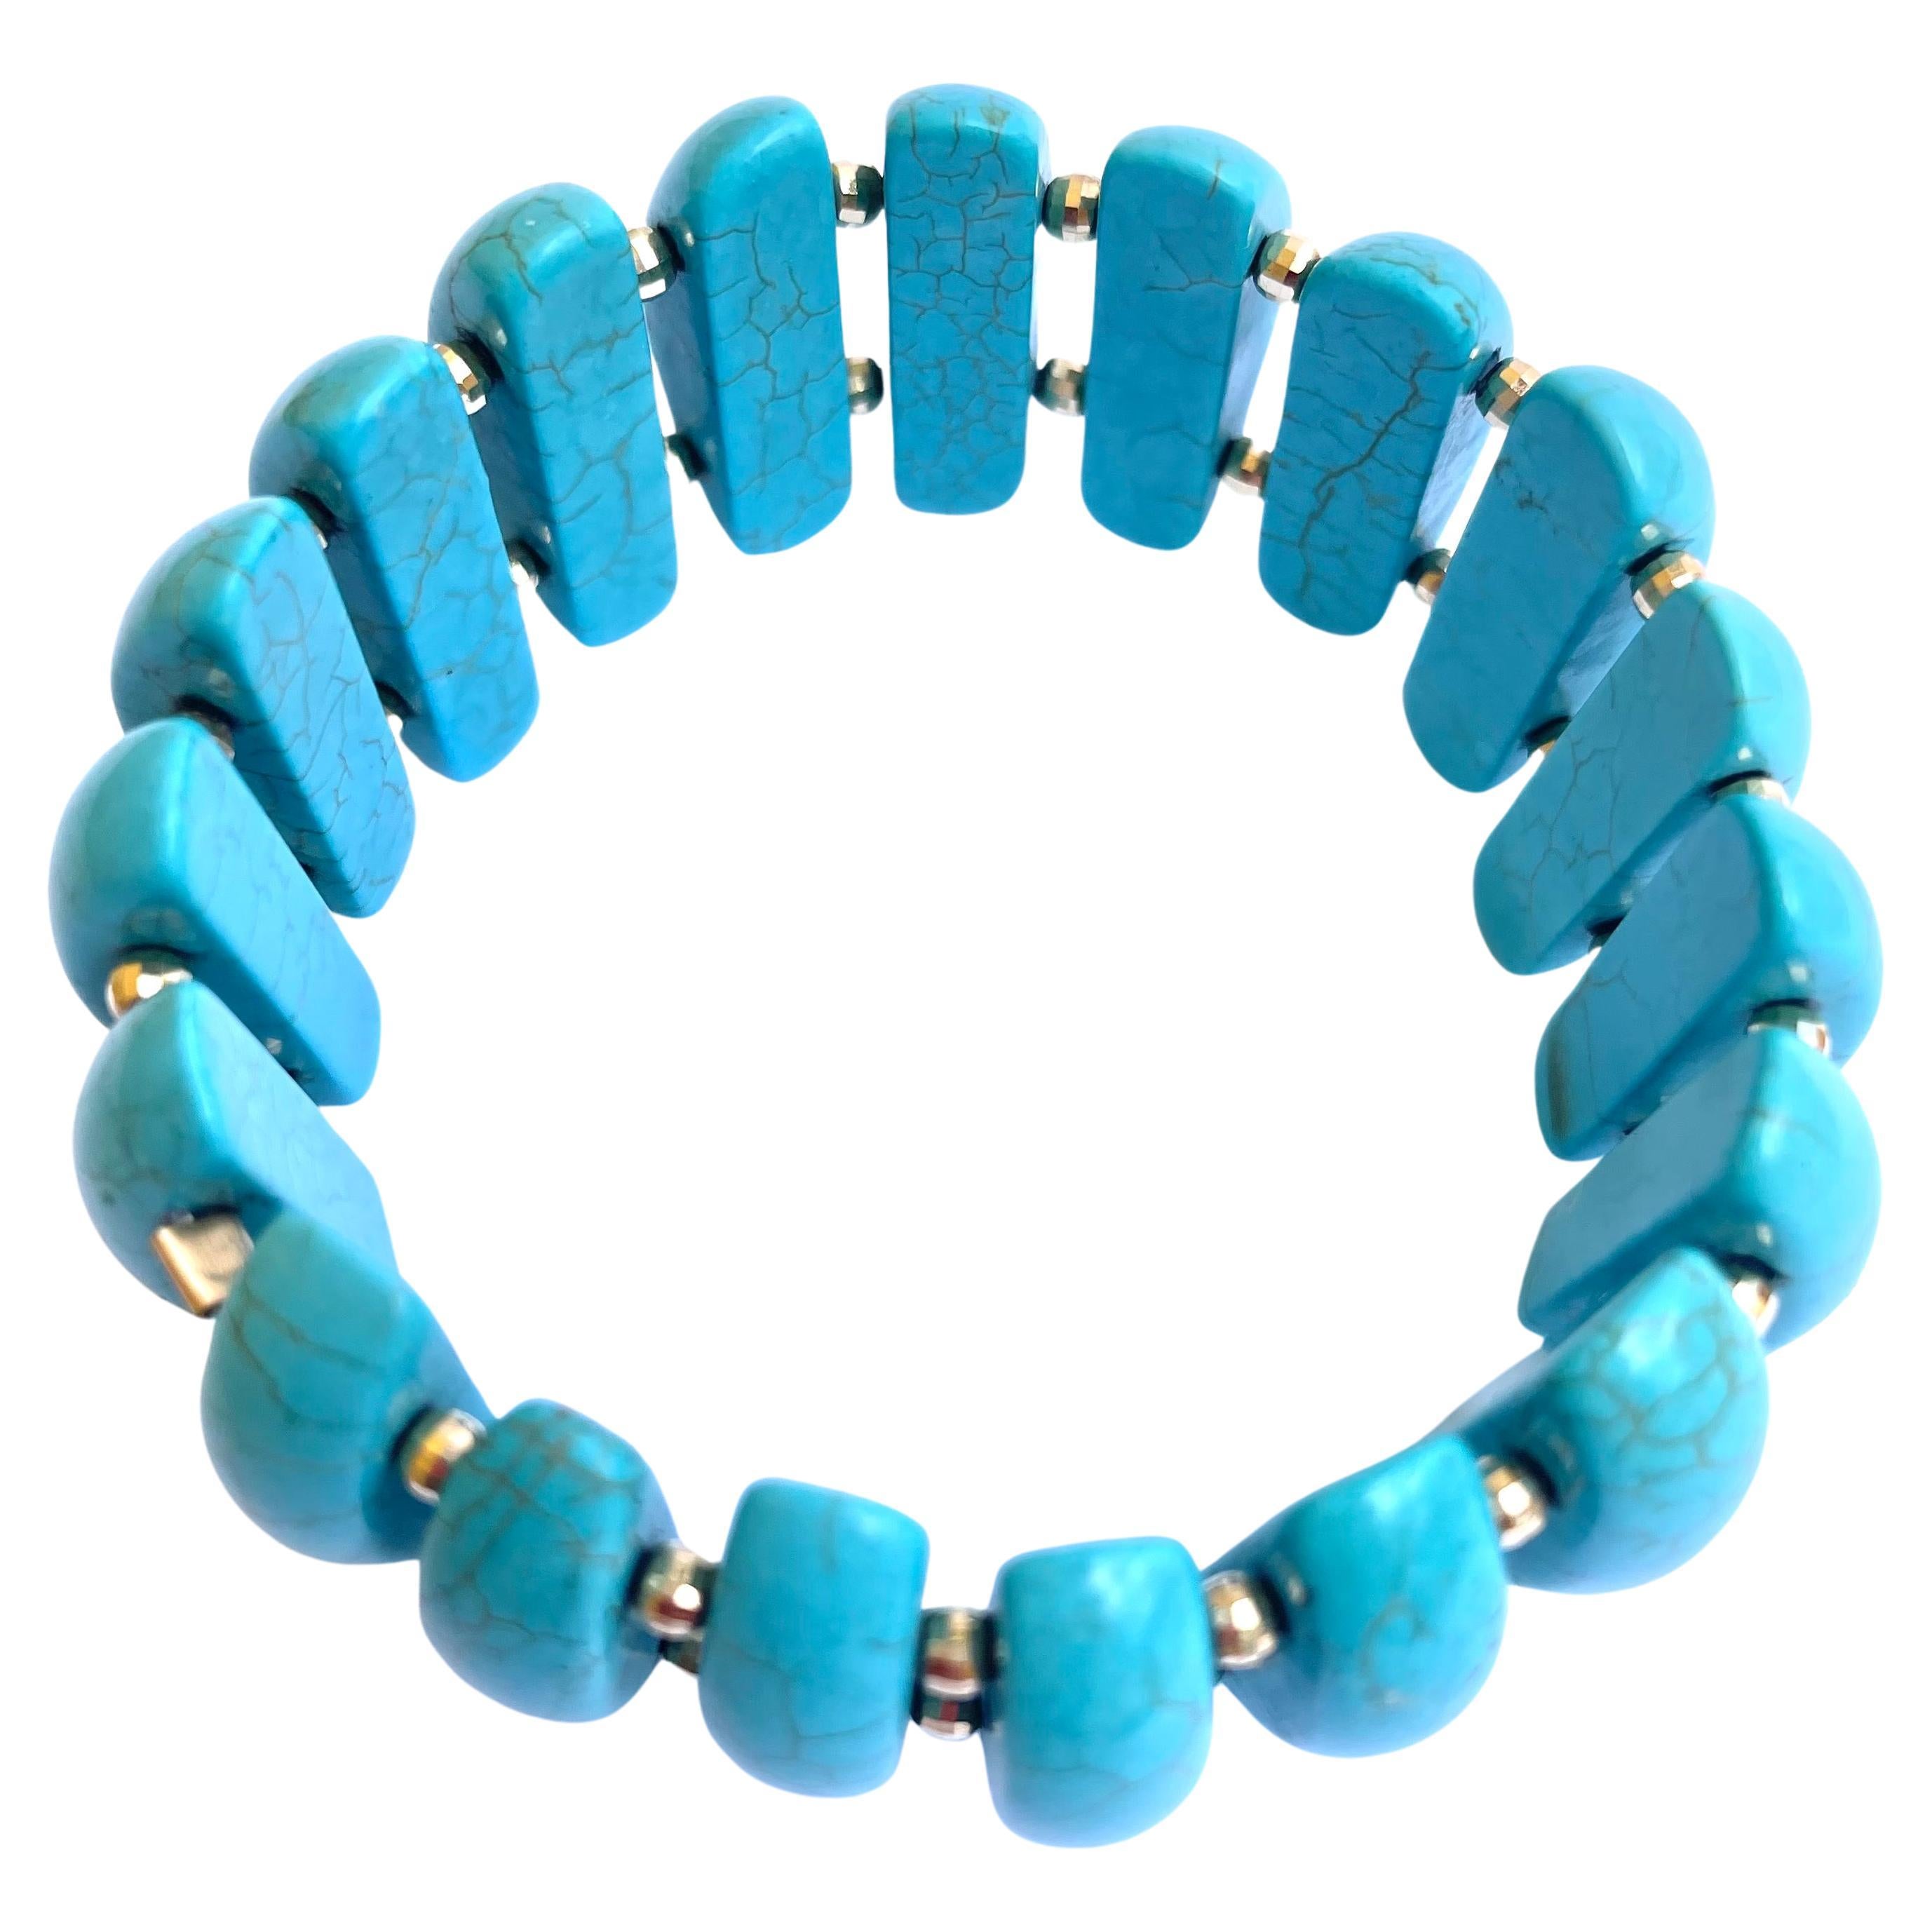 Description
Turquoise half-dome shape with 14k yellow gold faceted balls stretchy bracelet.
Item #B1179

Materials and Weight
Turquoise 252 carats, 8 x 25mm, half-dome shape.
Faceted balls 3mm 14k yellow gold, 36 pieces.

Dimensions
Size 7